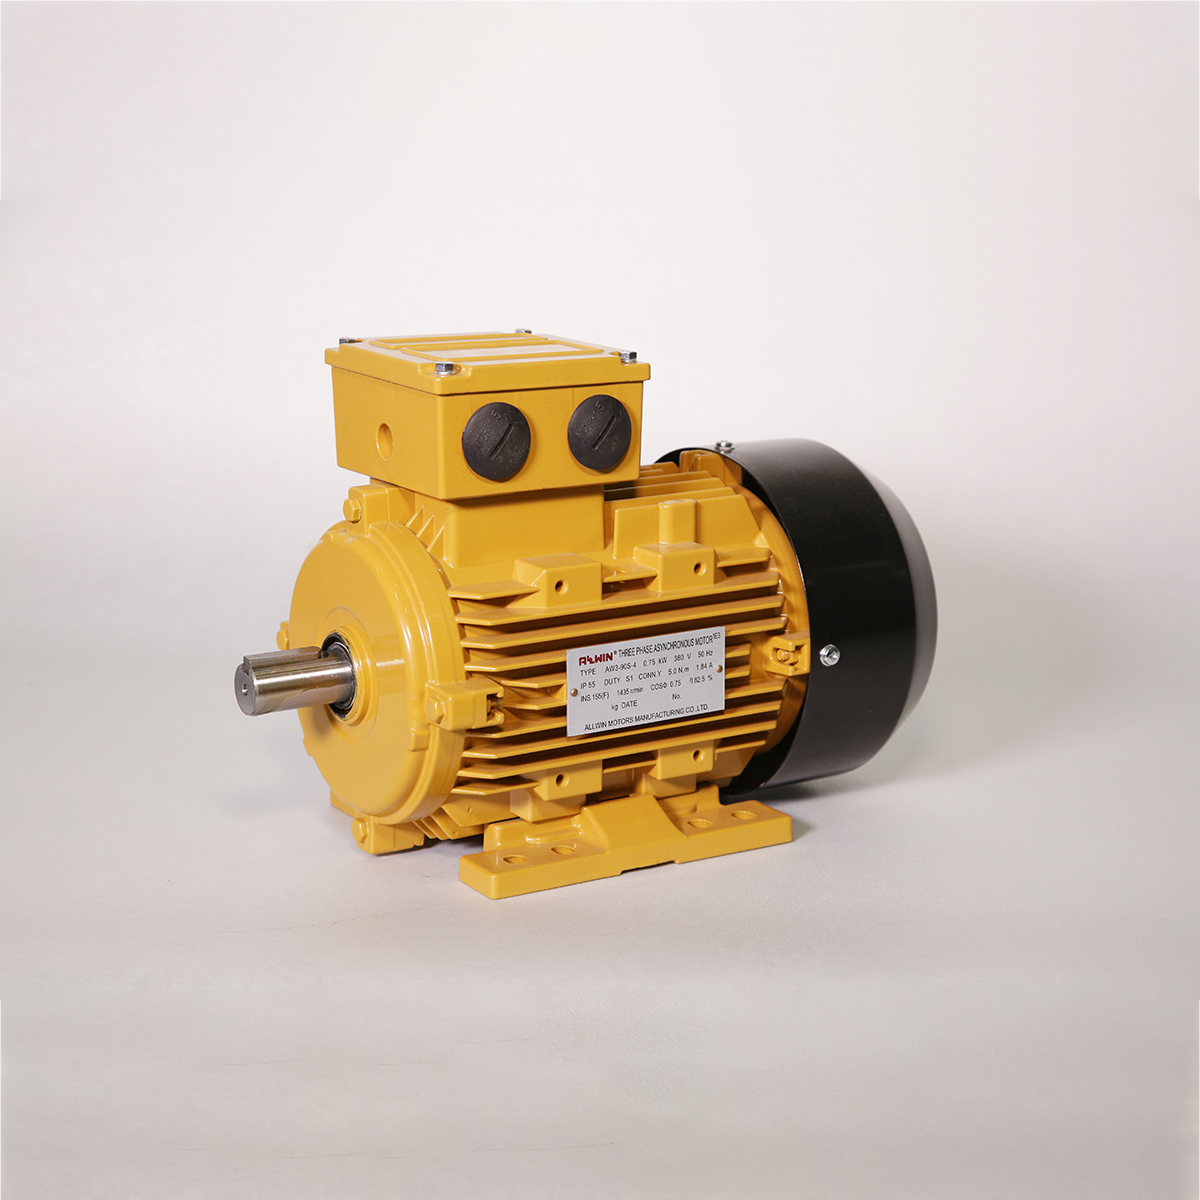 Low Voltage 3-Phase Asynchronous Motor with Aluminum Housing Featured Image